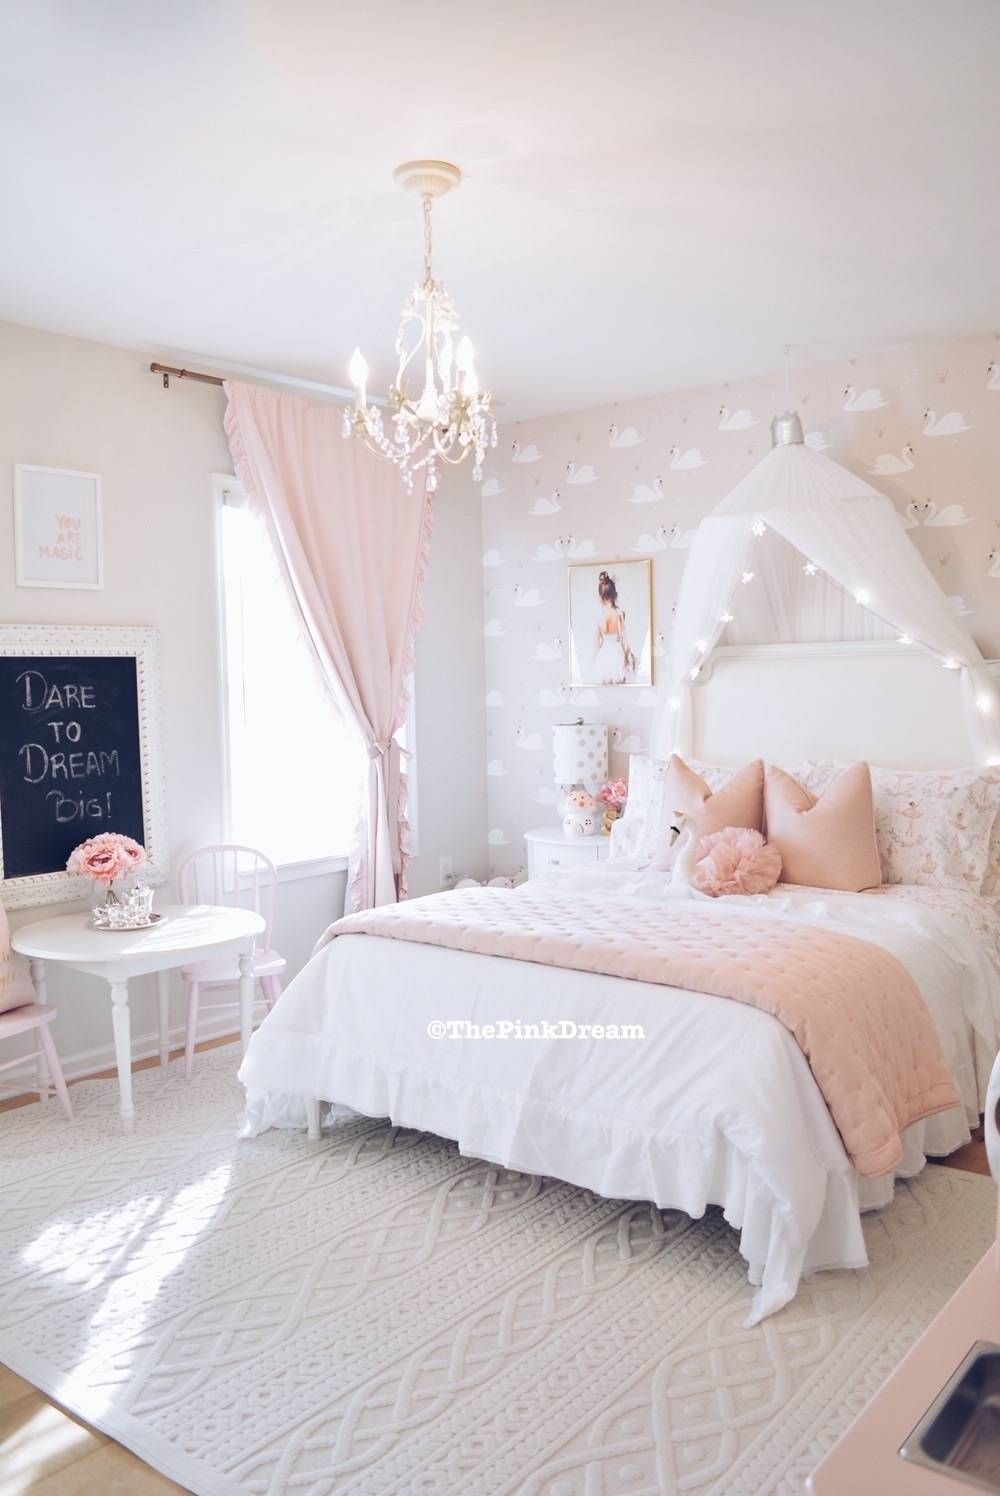 Curtains for girls room – a must have